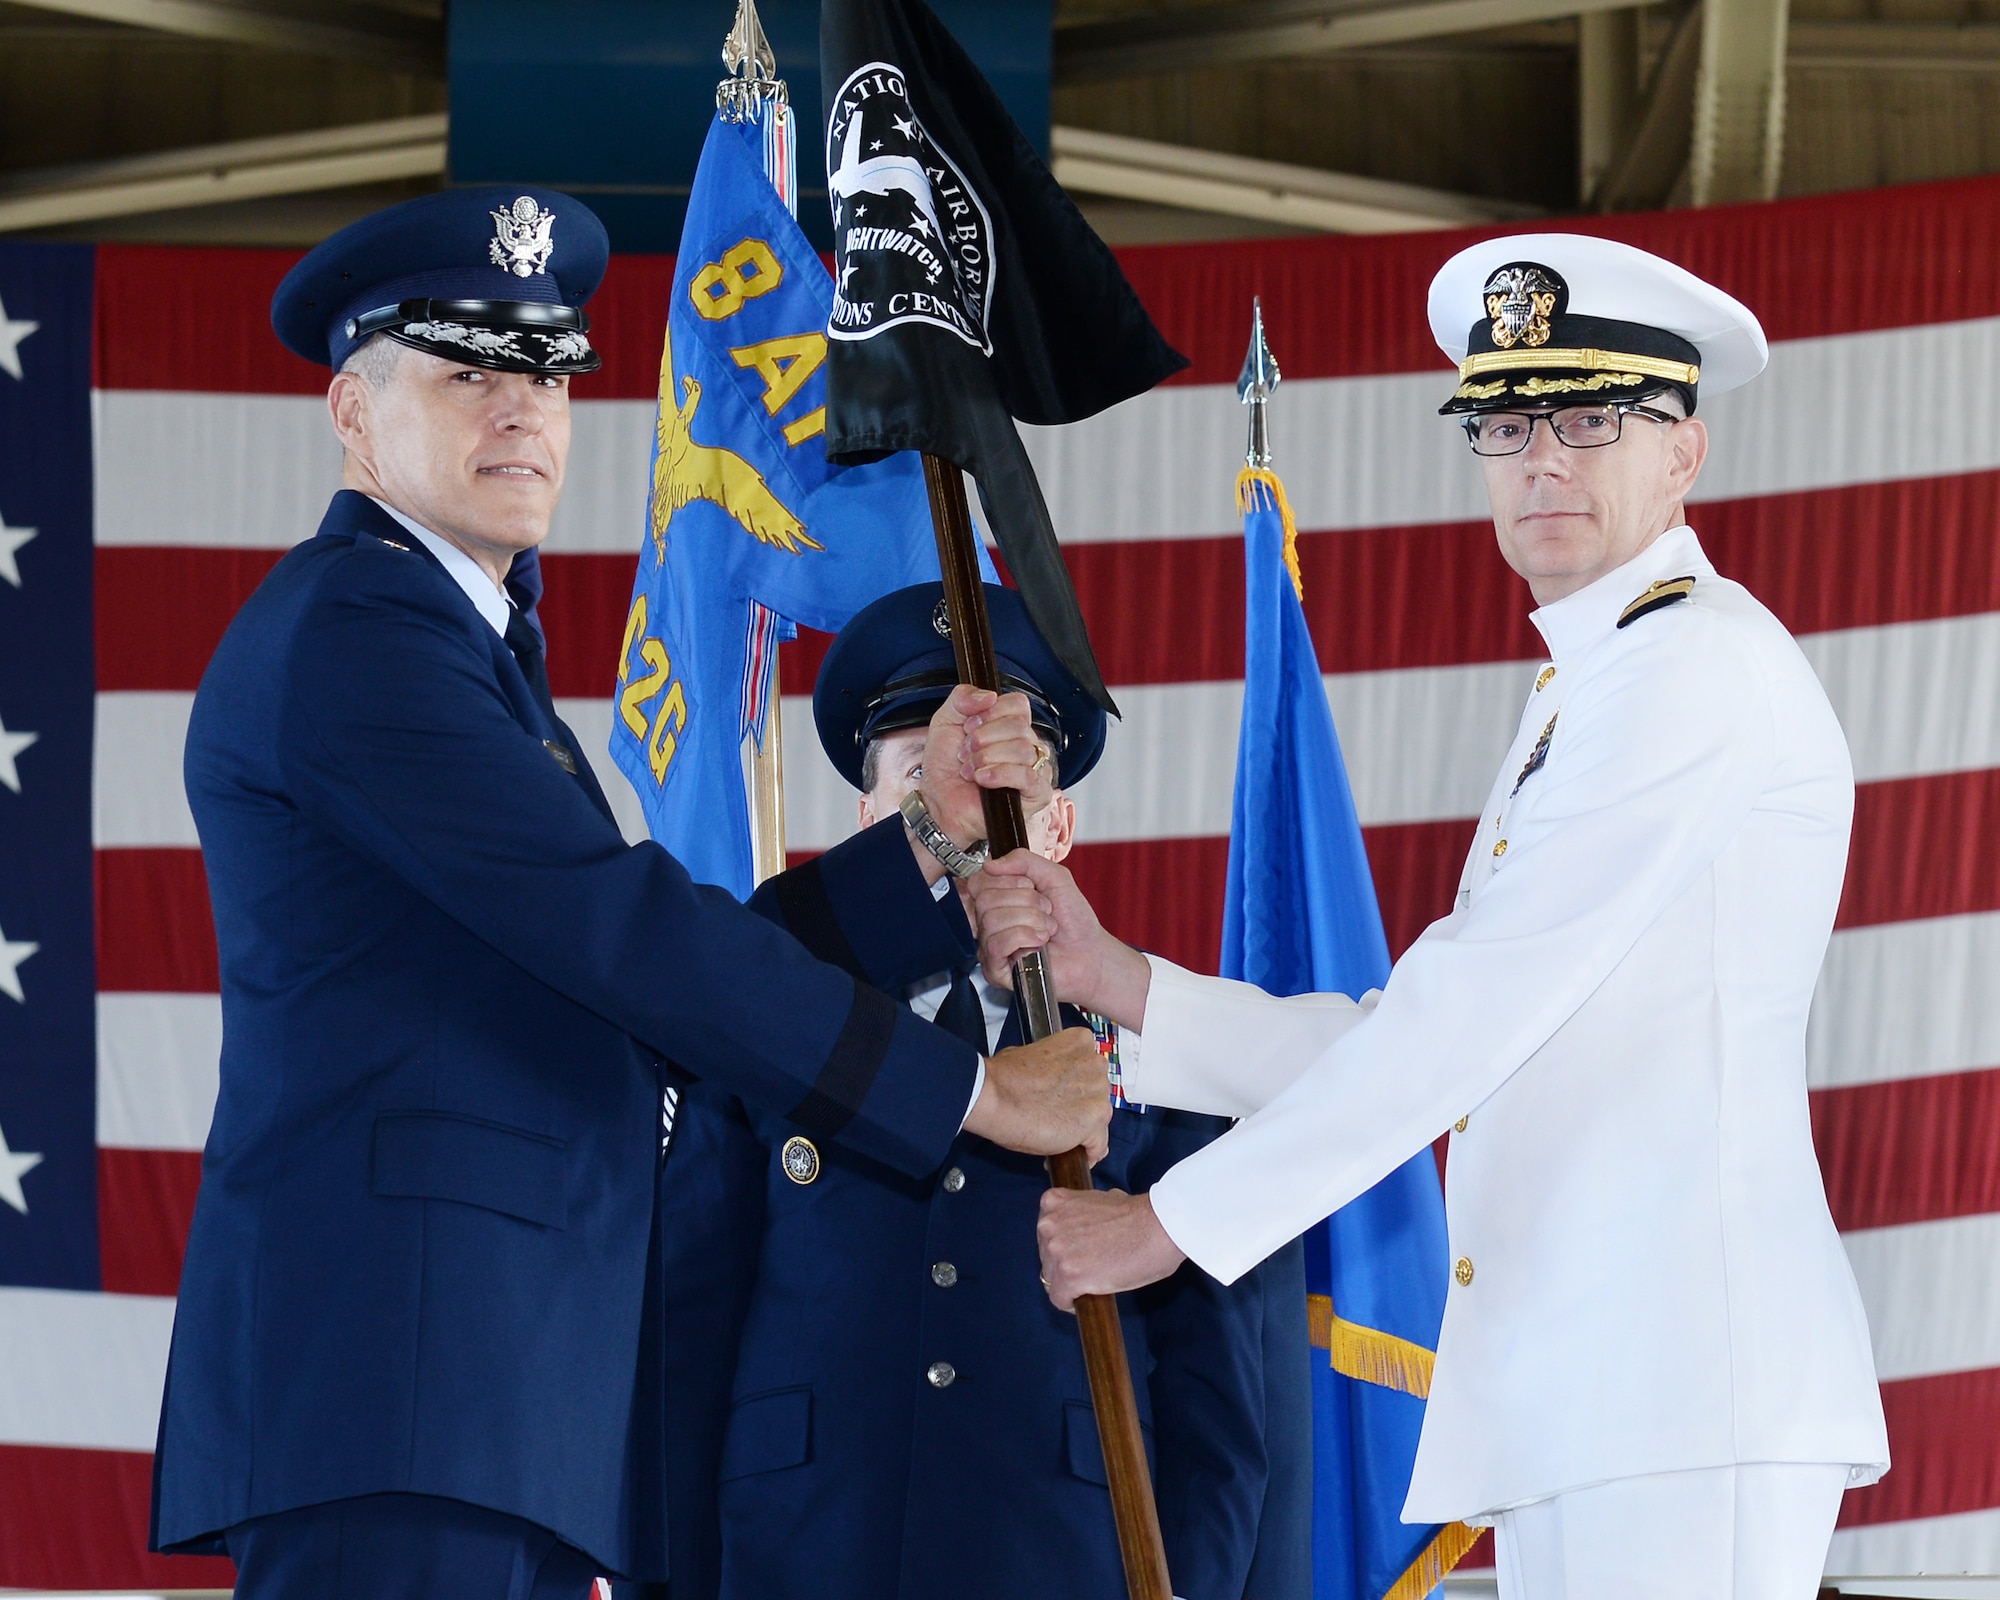 U.S. Air Force Maj. Gen. Thomas Bussiere, Eighth Air Force and Joint-Global Strike Operations Center commander (left), accepts the National Airborne Operations Center's guidon from U.S. Navy Capt. Dennis Crews, outgoing NAOC commander (right), during the dual-595th Command and Control Group and National Airborne Operations Center change of command ceremony July 27, 2018, at Offutt Air Force Base, Nebraska as a single commander assumed responsibility for both organizations. Passing of the guidon is a time-honored military tradition signifying the transfer of command.(U.S. Air Force photo by Charles Haymond)